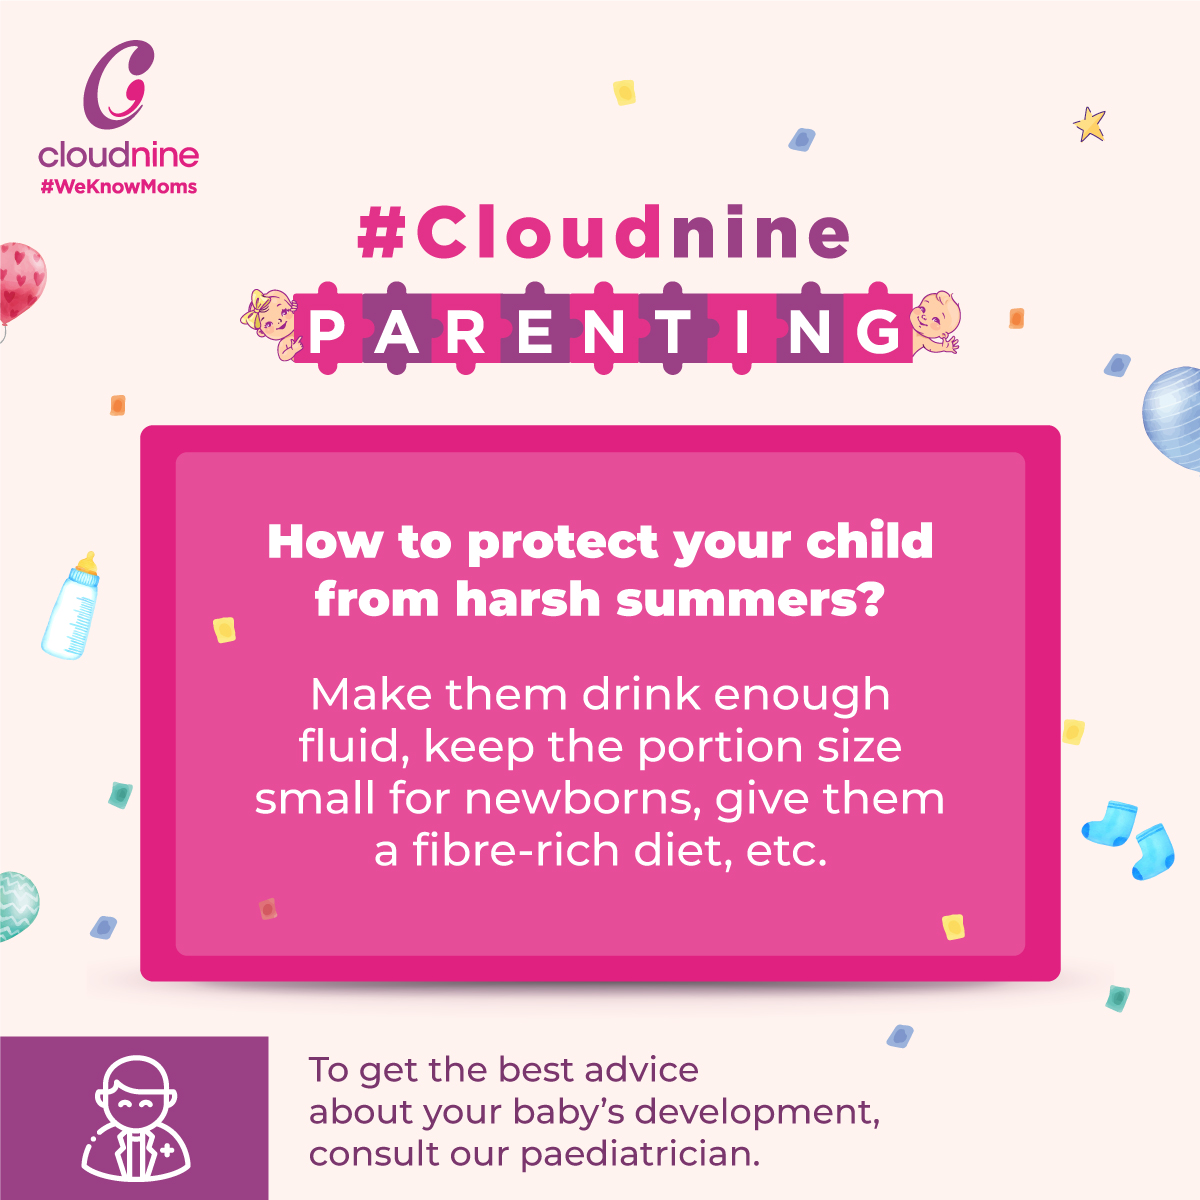 ☀️Keep your child safe and comfortable in summer by ensuring they stay well-hydrated. Encourage them to drink plenty of fluids and include fibre-rich foods in their diet. Also, remember to keep portion sizes small for newborns to prevent digestive issues.🥤